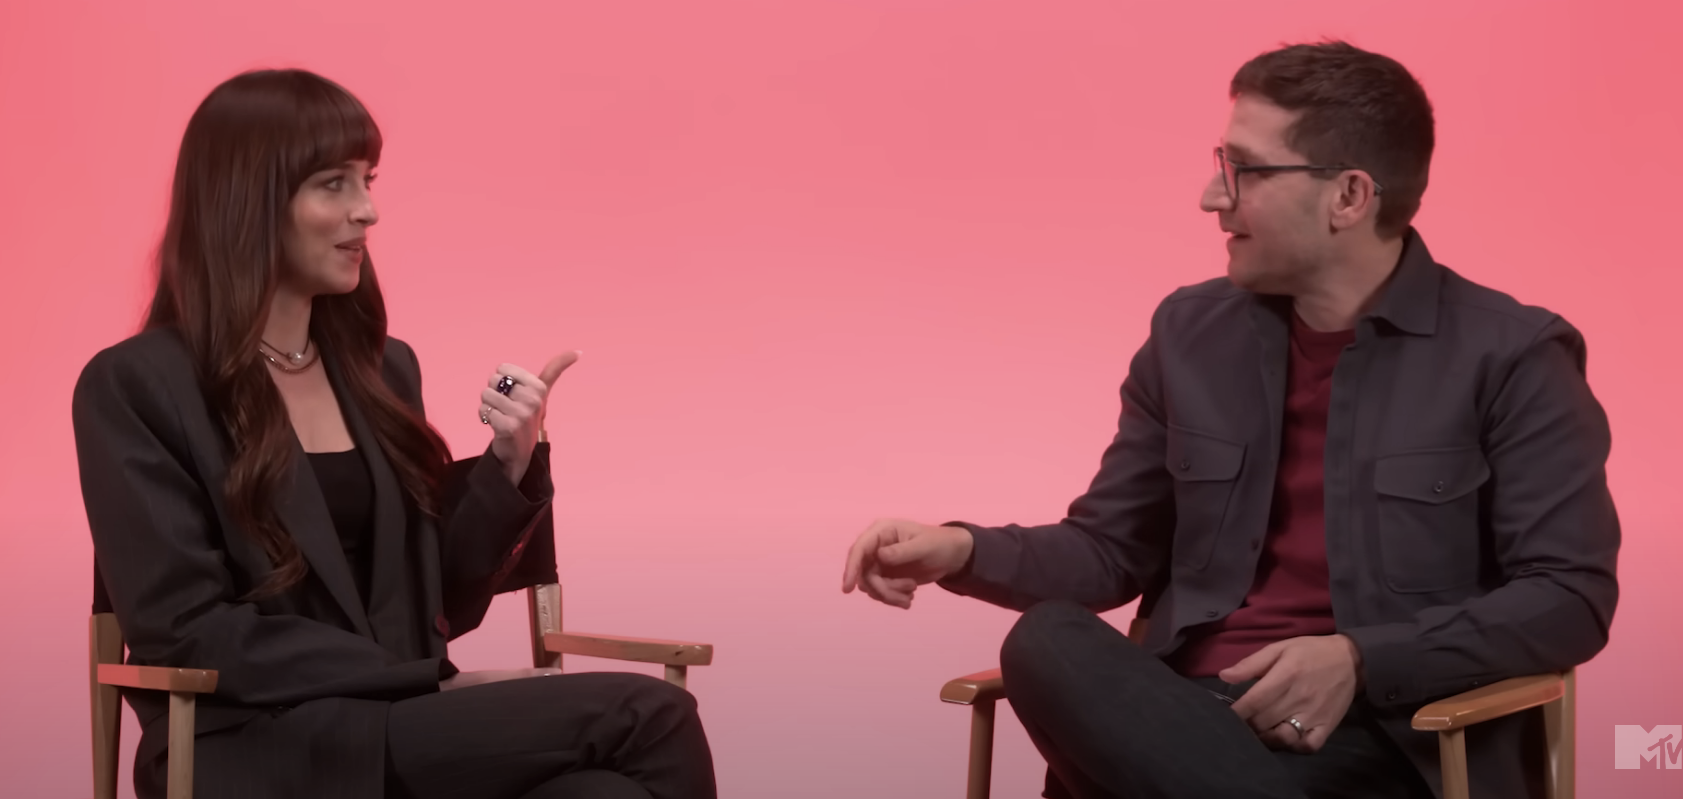 Dakota and Josh sitting, chatting, one gesturing with hand; they&#x27;re in front of a pink background